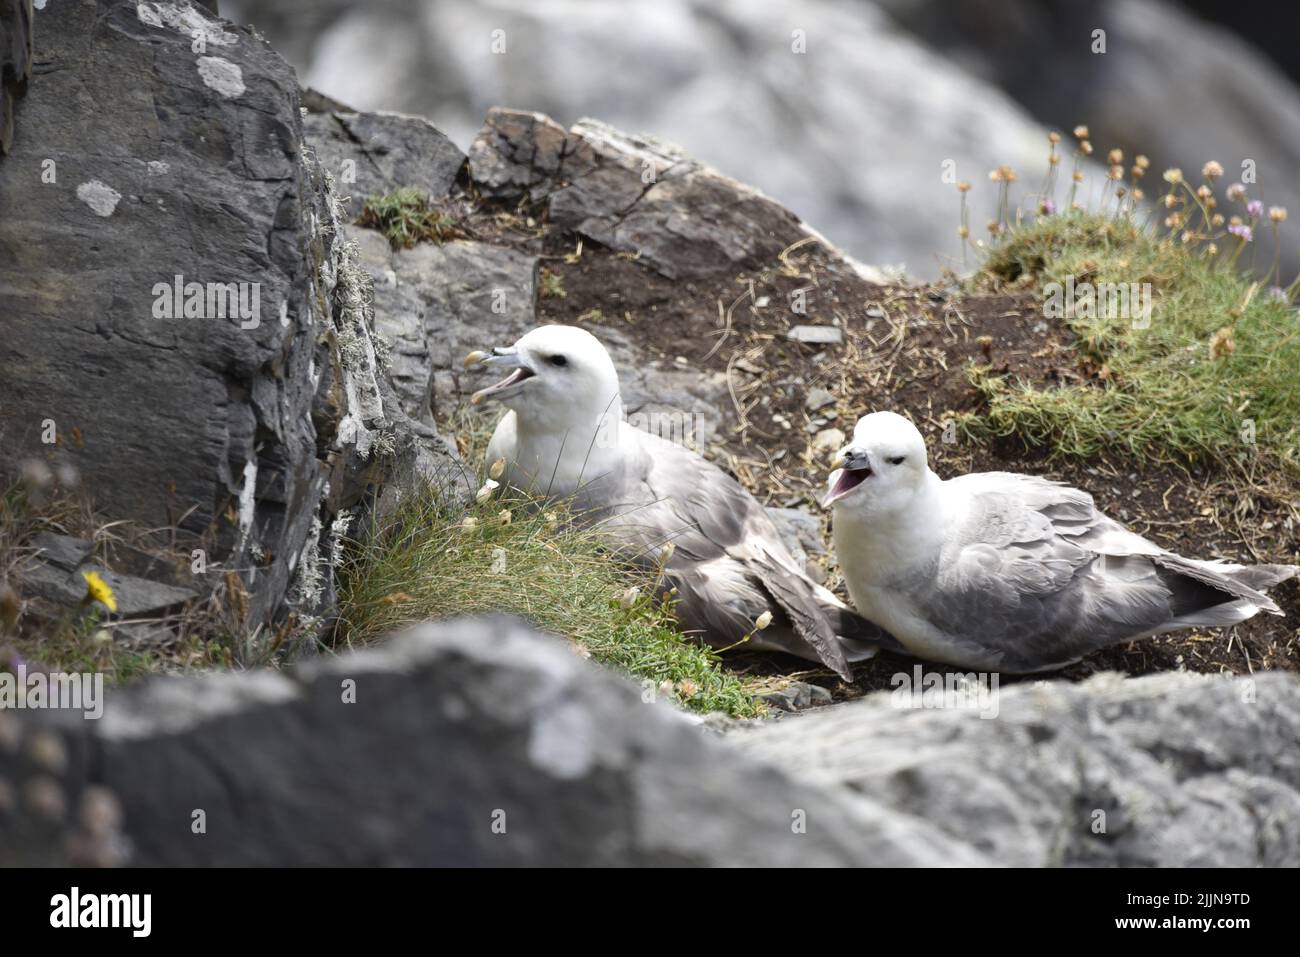 Close-Up Image of Two European Herring Gull Chicks (Larus argentatus) Looking Up from Nest on Sea Cliffs with Beaks Open on a Sunny Day in the UK Stock Photo